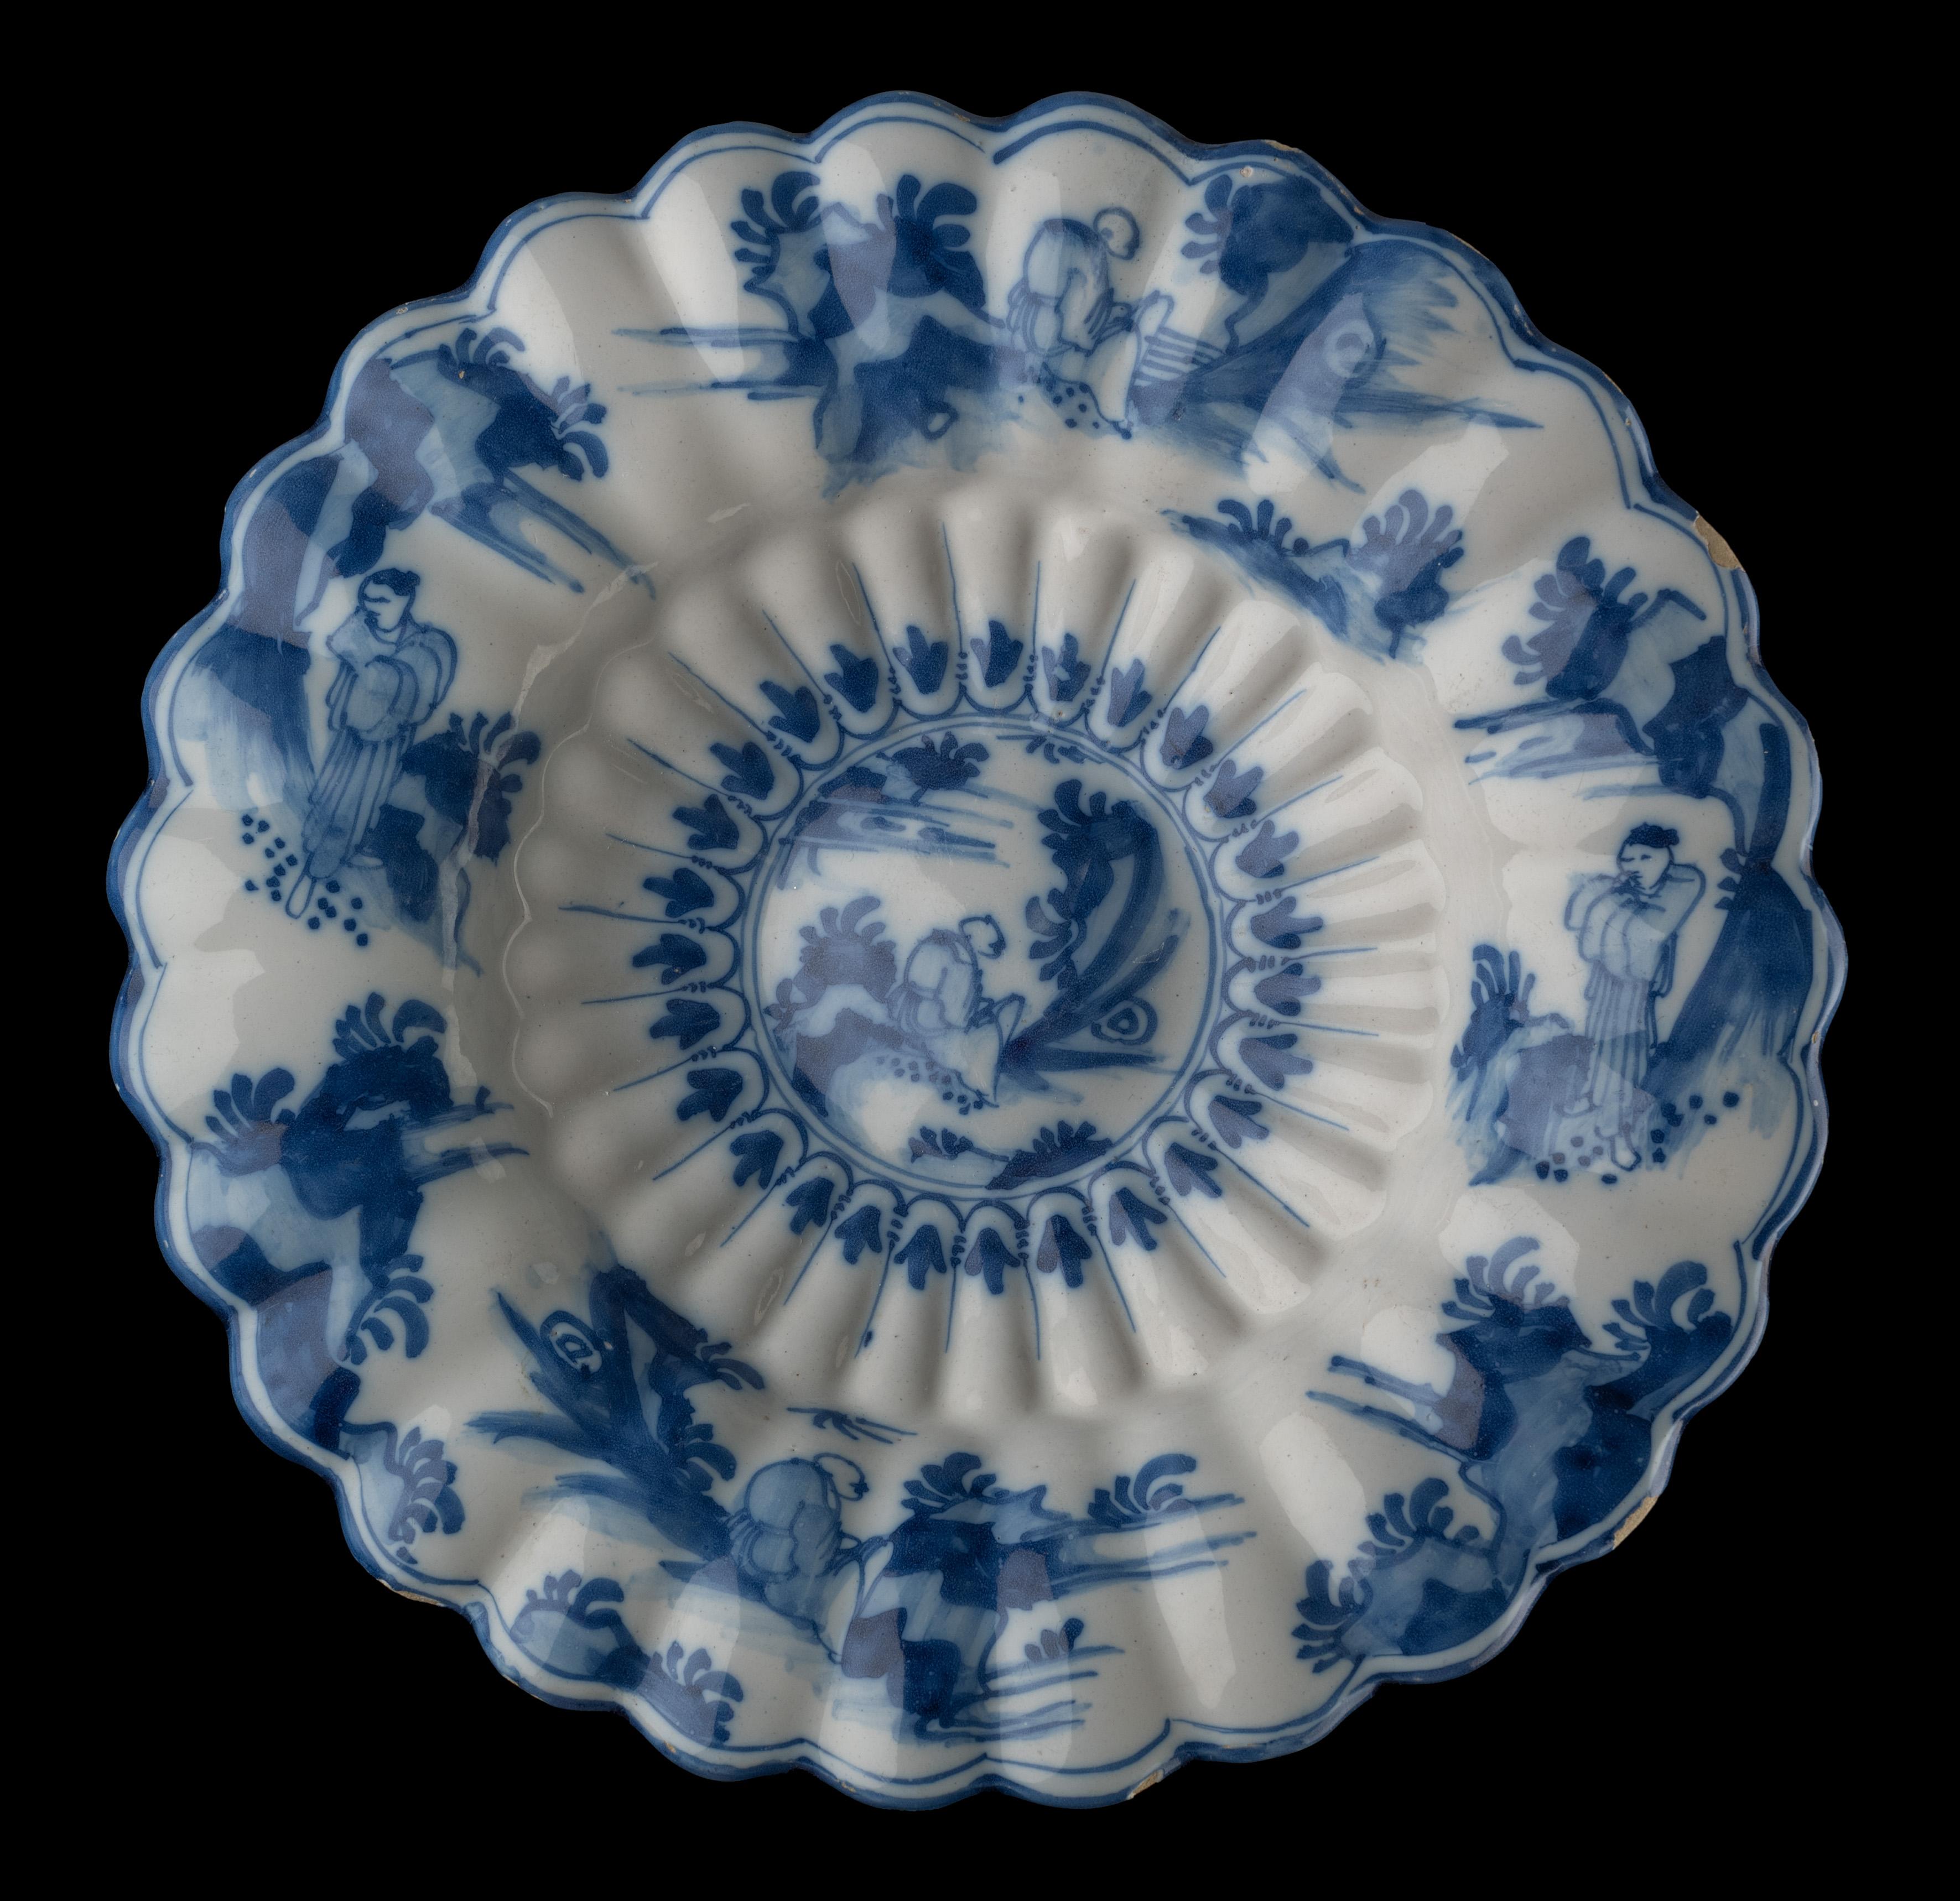 Blue and white chinoiserie lobed dish. Delft, 1650-1680 
Dimensions: diameter 33,5 cm / 13.18 in. 

The blue and white lobed dish is composed of twenty-seven double lobes. The curved center is painted with a Chinese in an Oriental landscape,